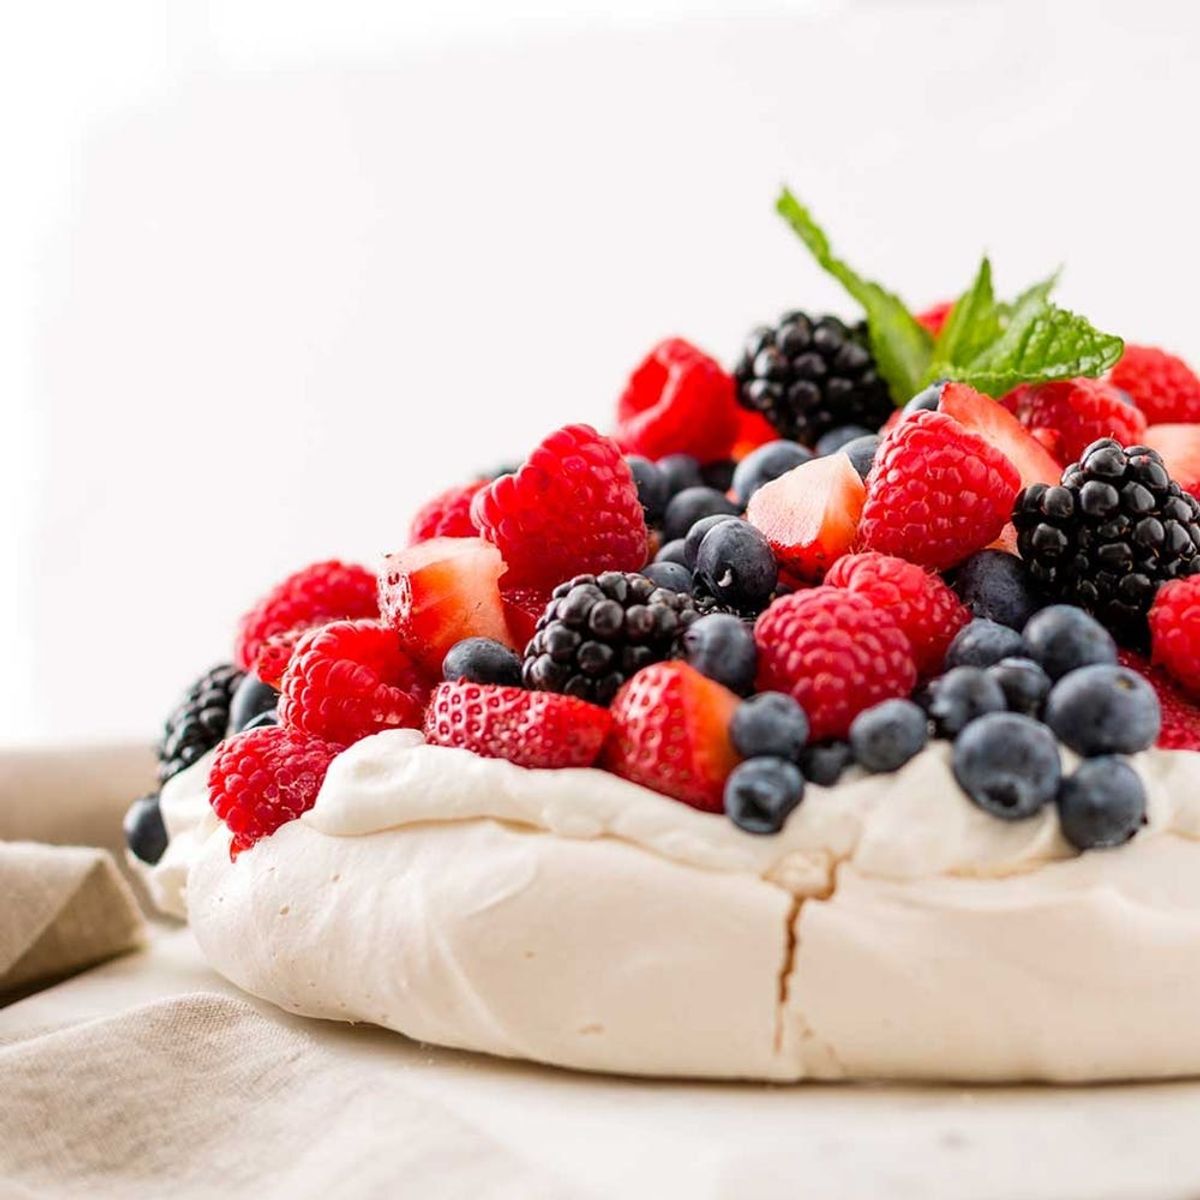 Celebrate the 4th of July With This Patriotic Pavlova Recipe